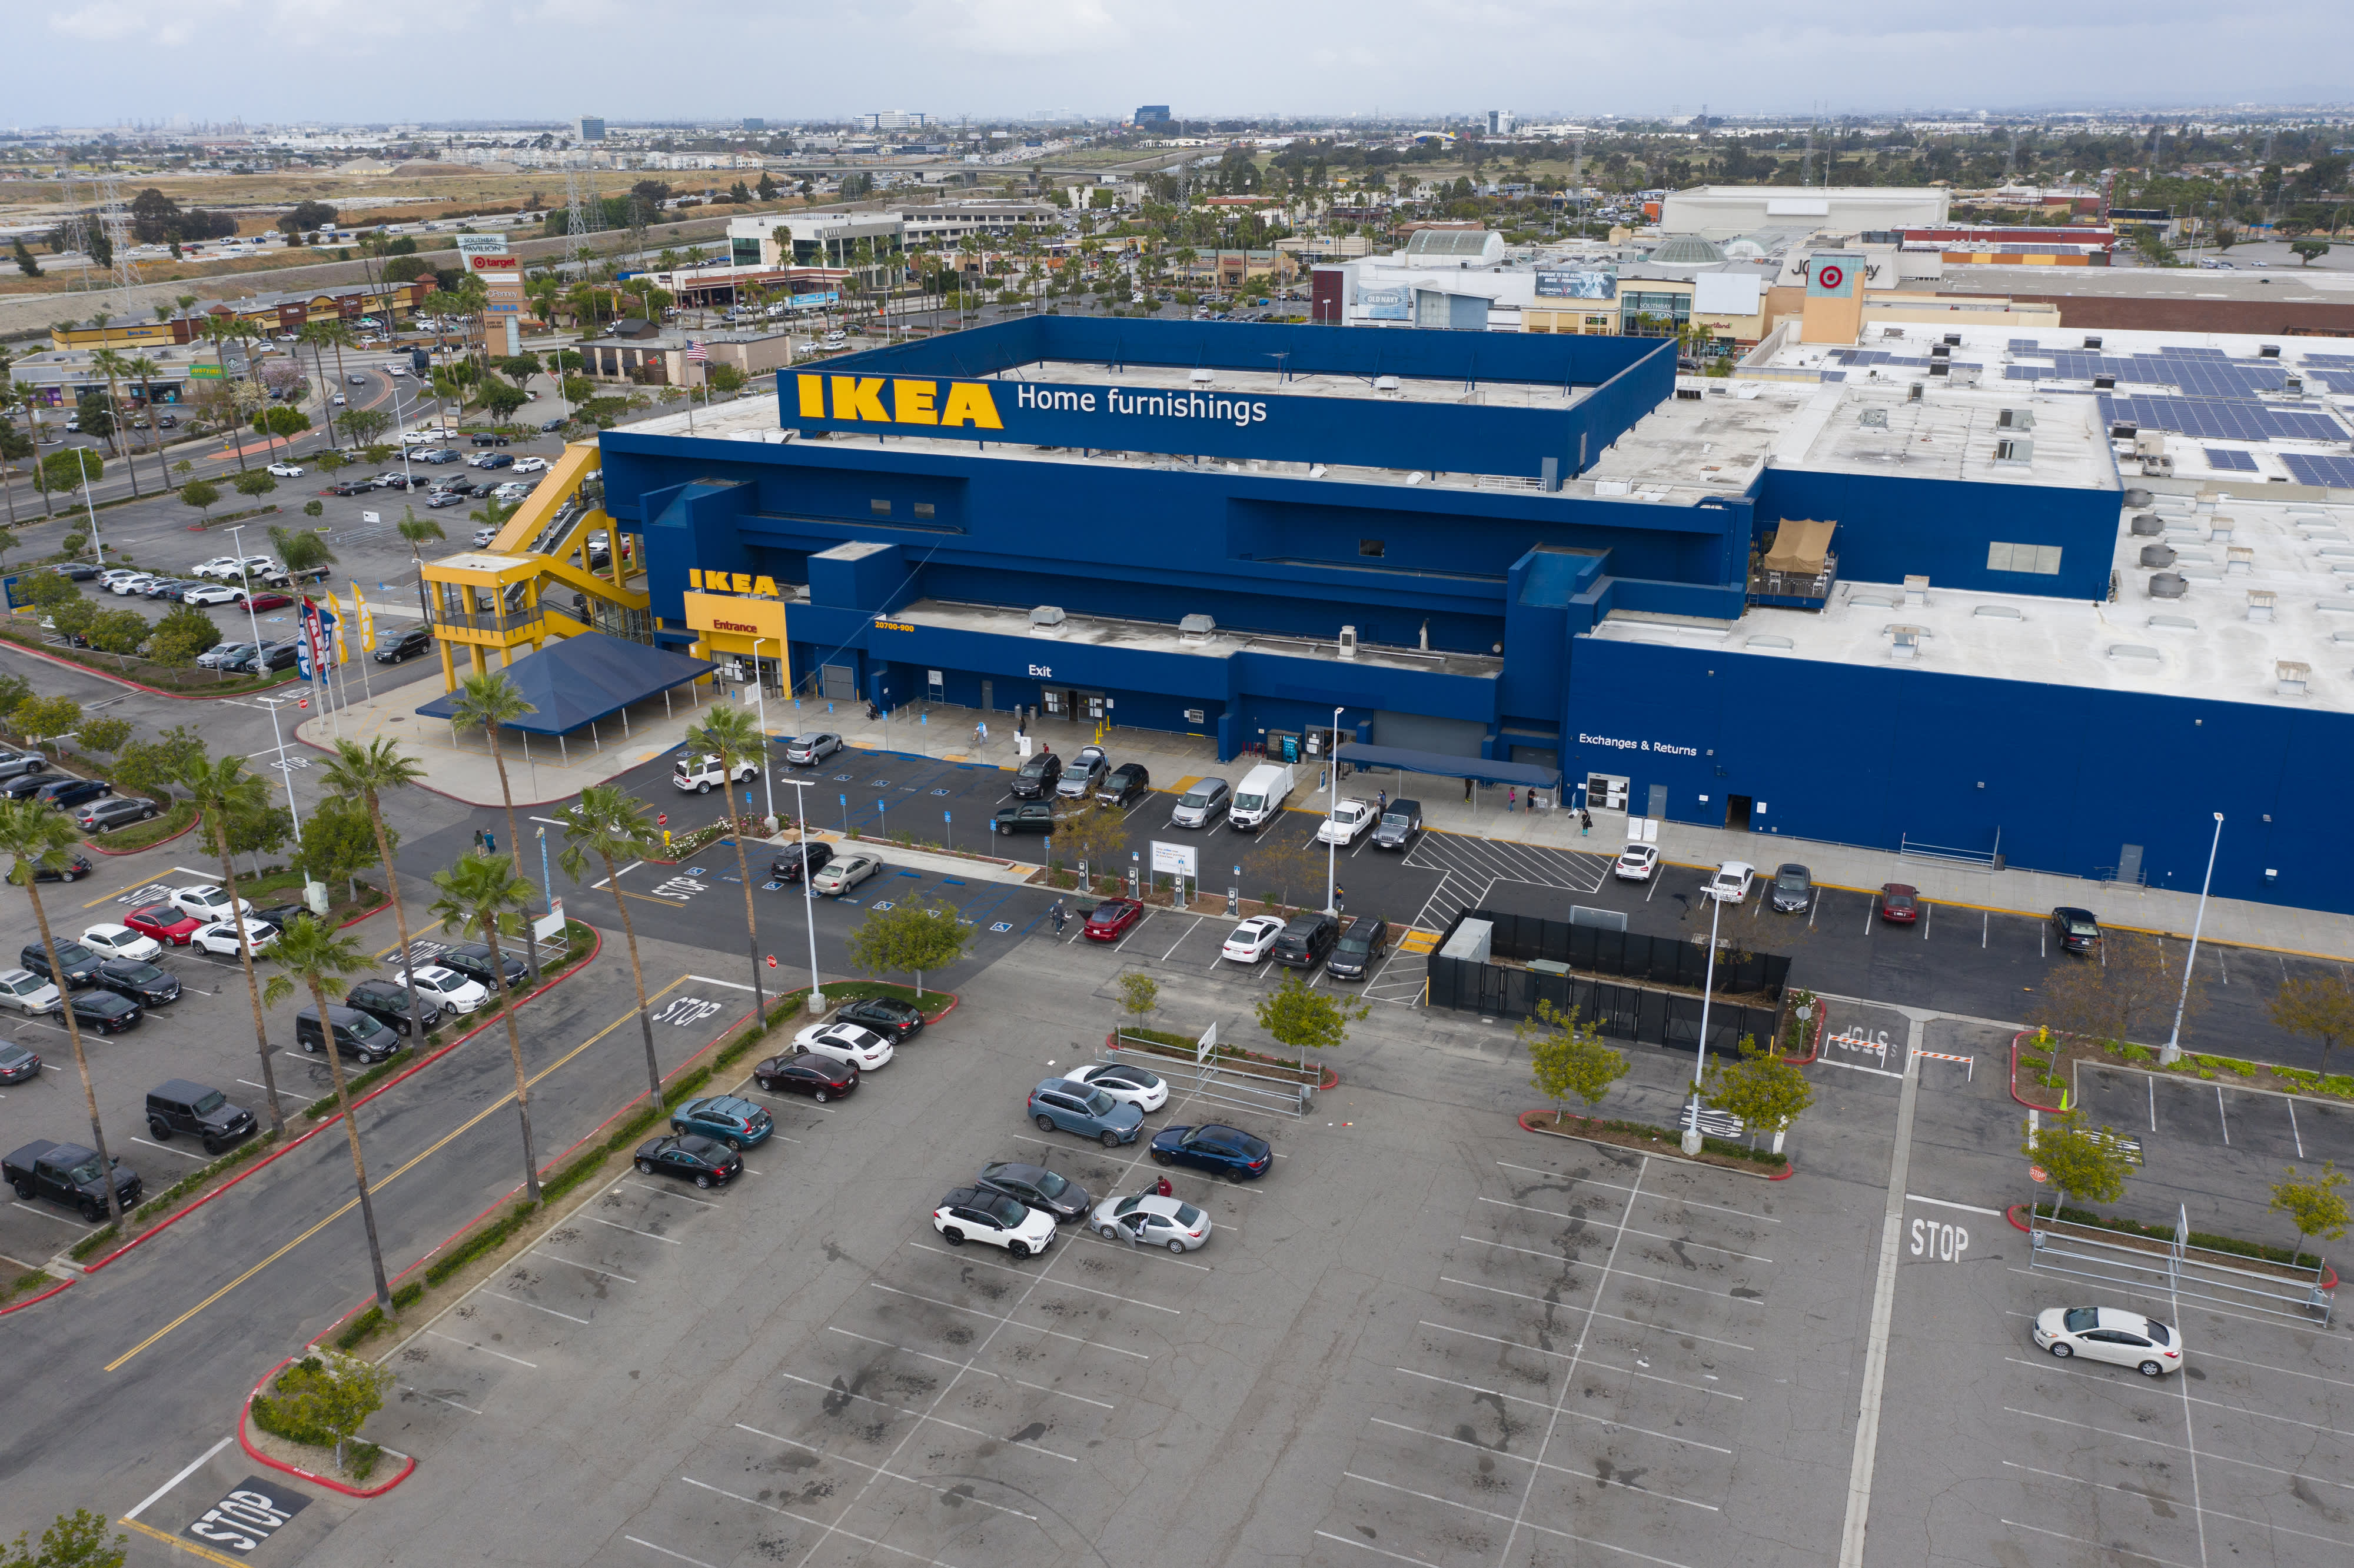 Ikea pilots U.S. furniture buyback and resale program as it eyes a nationwide launch